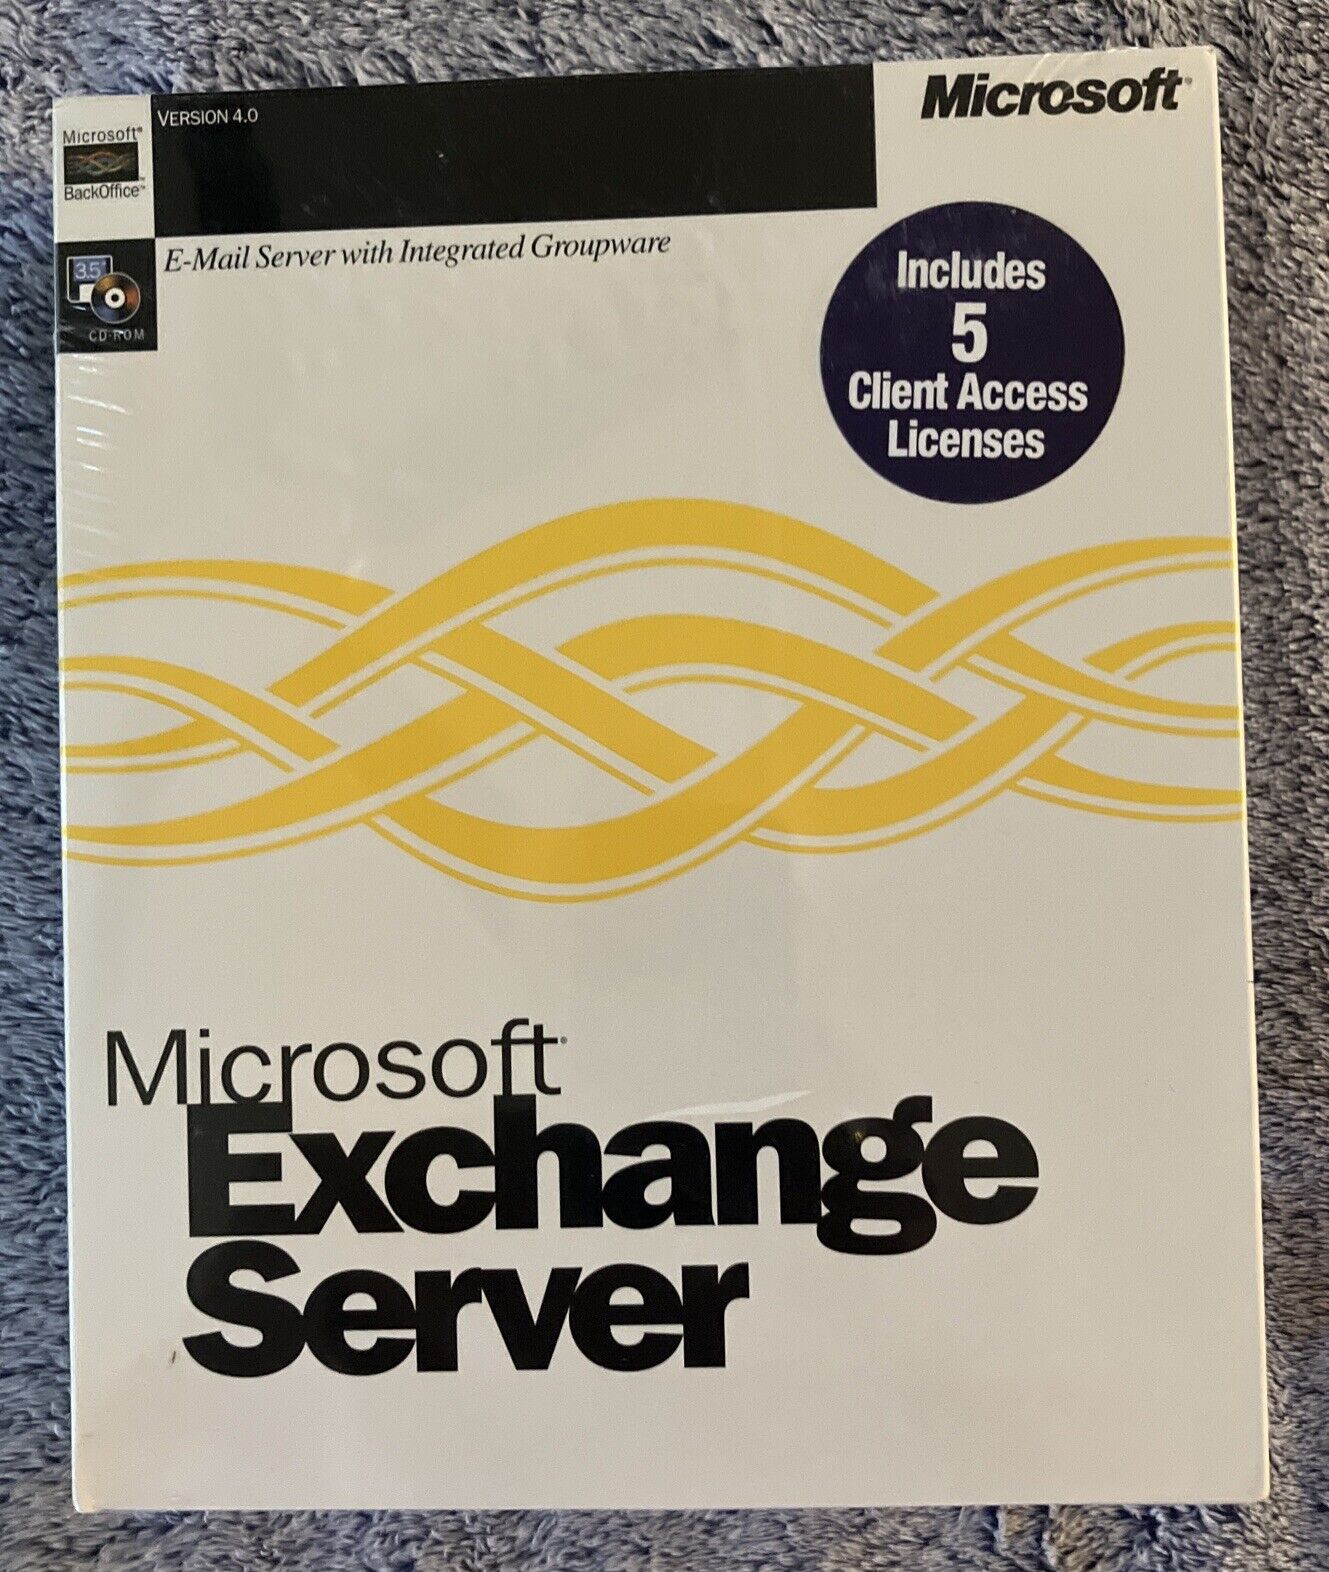 Microsoft Exchange Server-4.0-E-Mail Server With Integrated Groupware